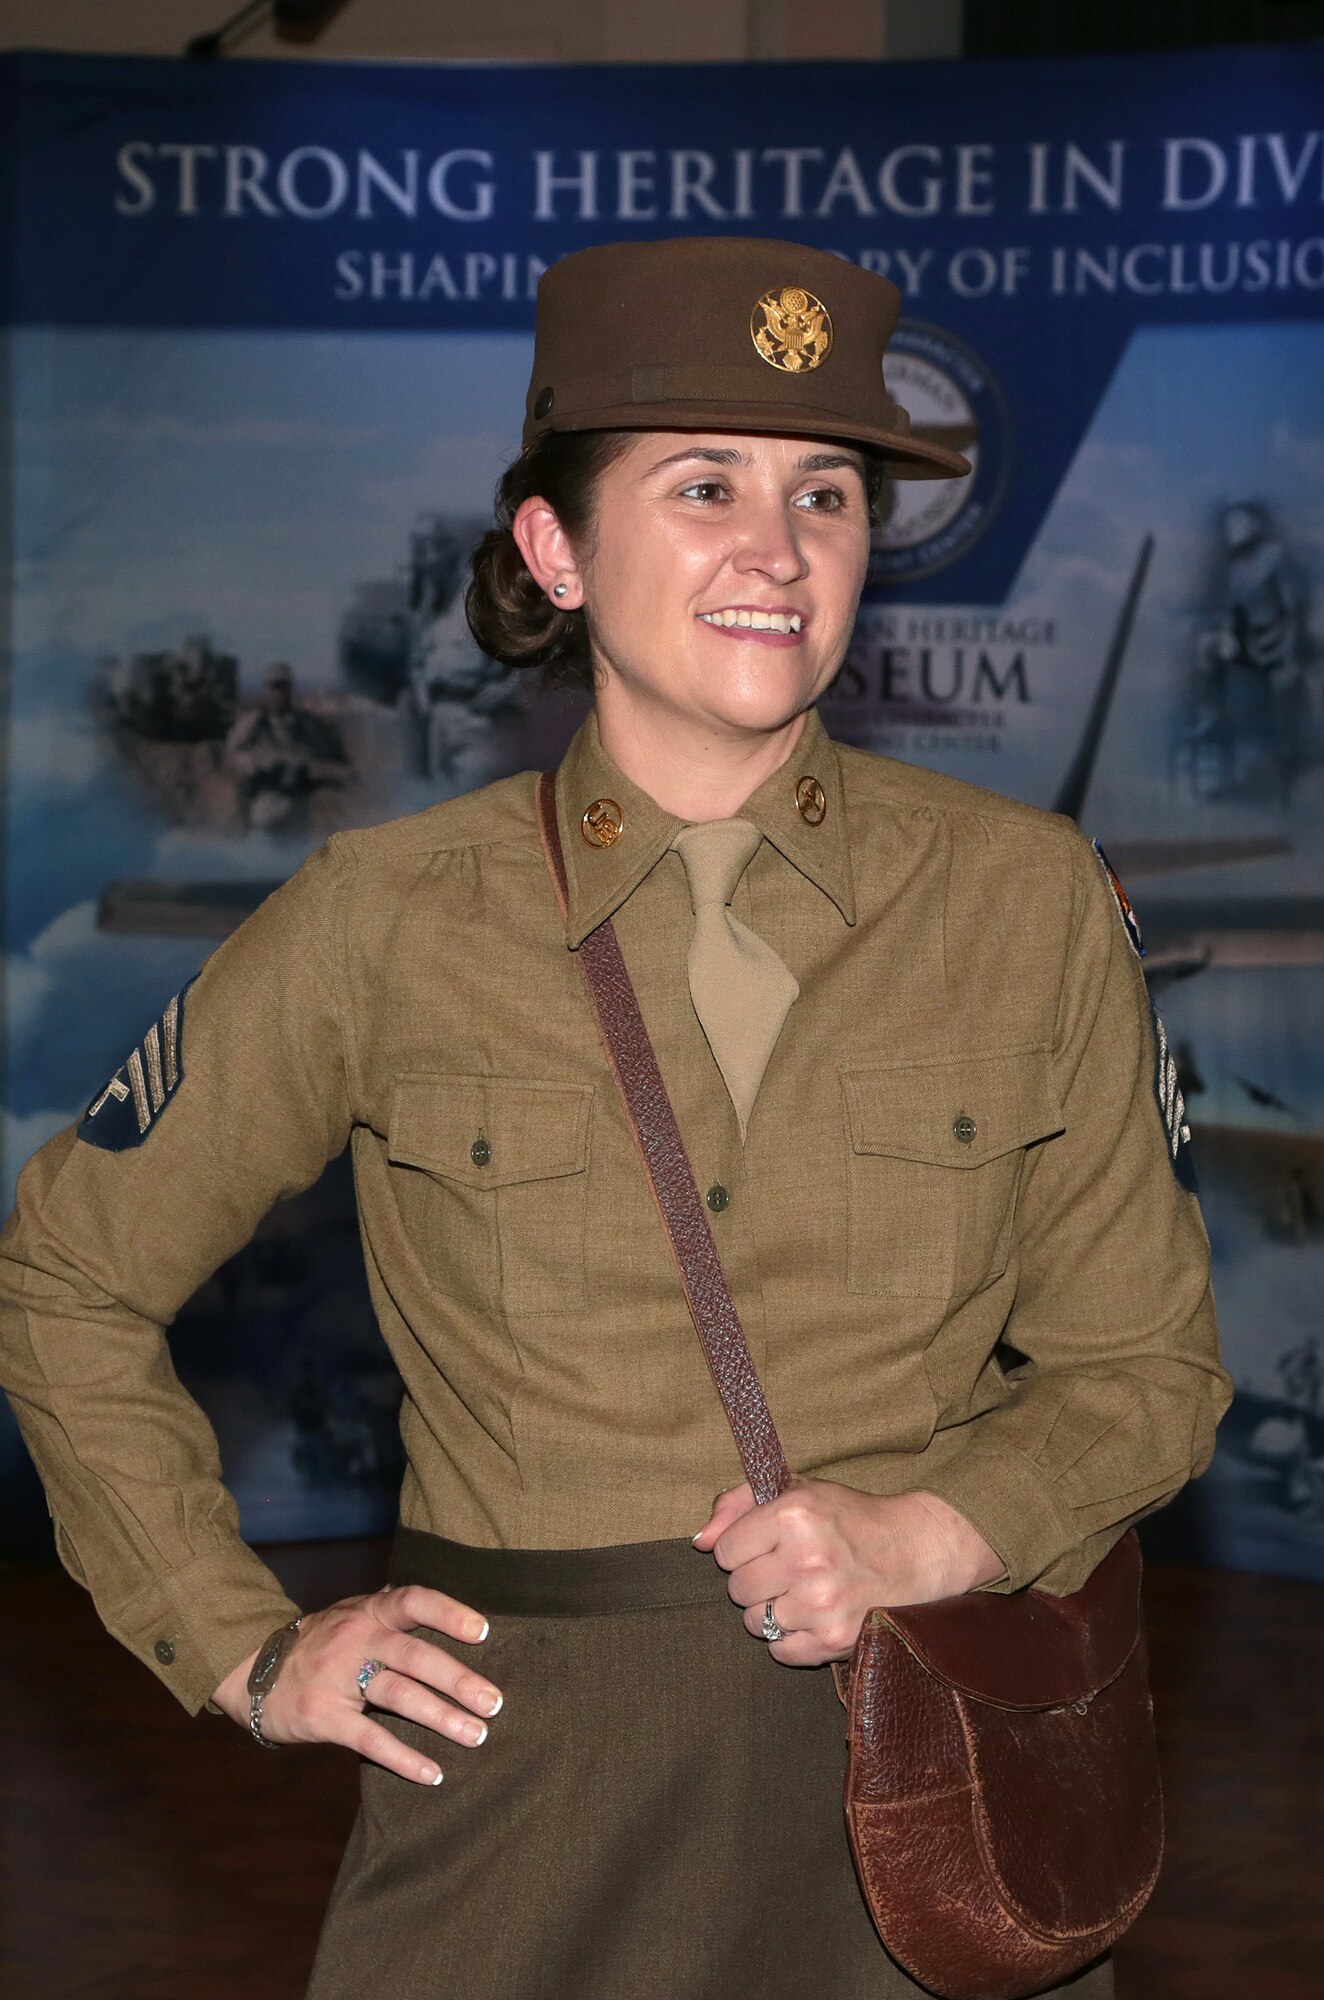 An Airman models one of the first uniforms designated for women who joined the Air Force in 1948 during a living history fashion show Oct. 7, 2016, at Joint Base San Antonio-Lackland’s Gateway Club. JBSA-Lackland hosted a reunion of the Women in the Air Force, a term for women who joined the Air Force between the years of 1949-1976. The WAF was founded in 1948 out of the Women’s Armed Service Integration Act, which enabled tens of thousands of female service members to find jobs in the Air Force. In 1976 women were accepted into the service on an equal basis with men. 